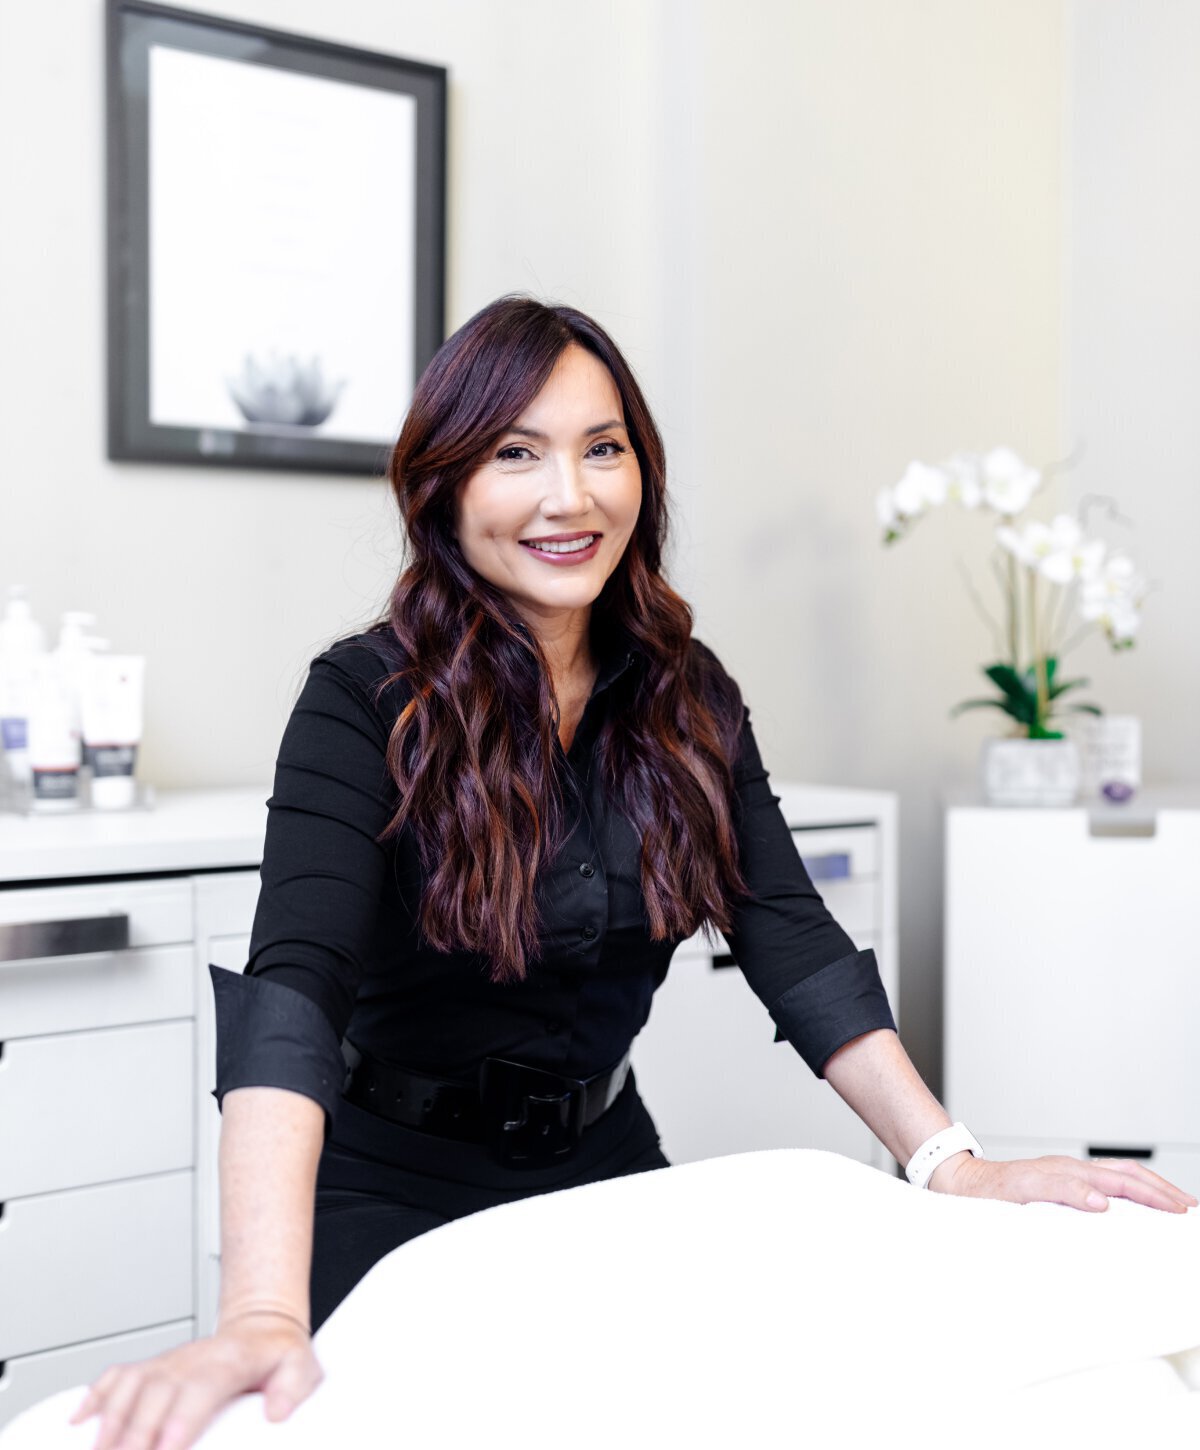 Bay Area Med Spa Specialist Terrie Absher